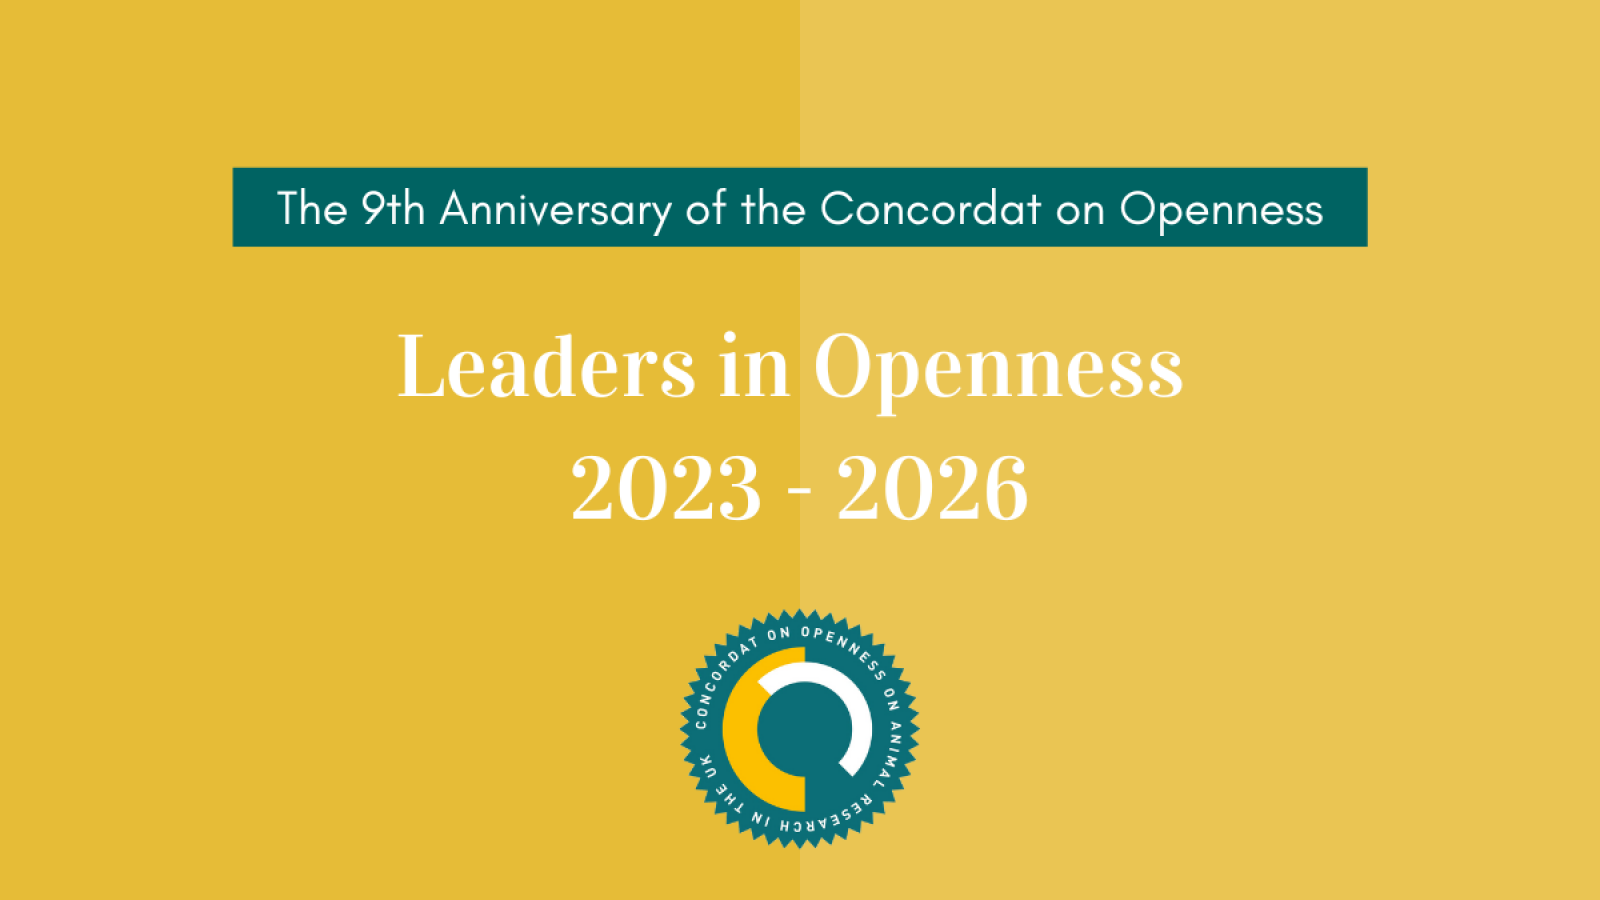 Leaders in Openness 2023 - 2026